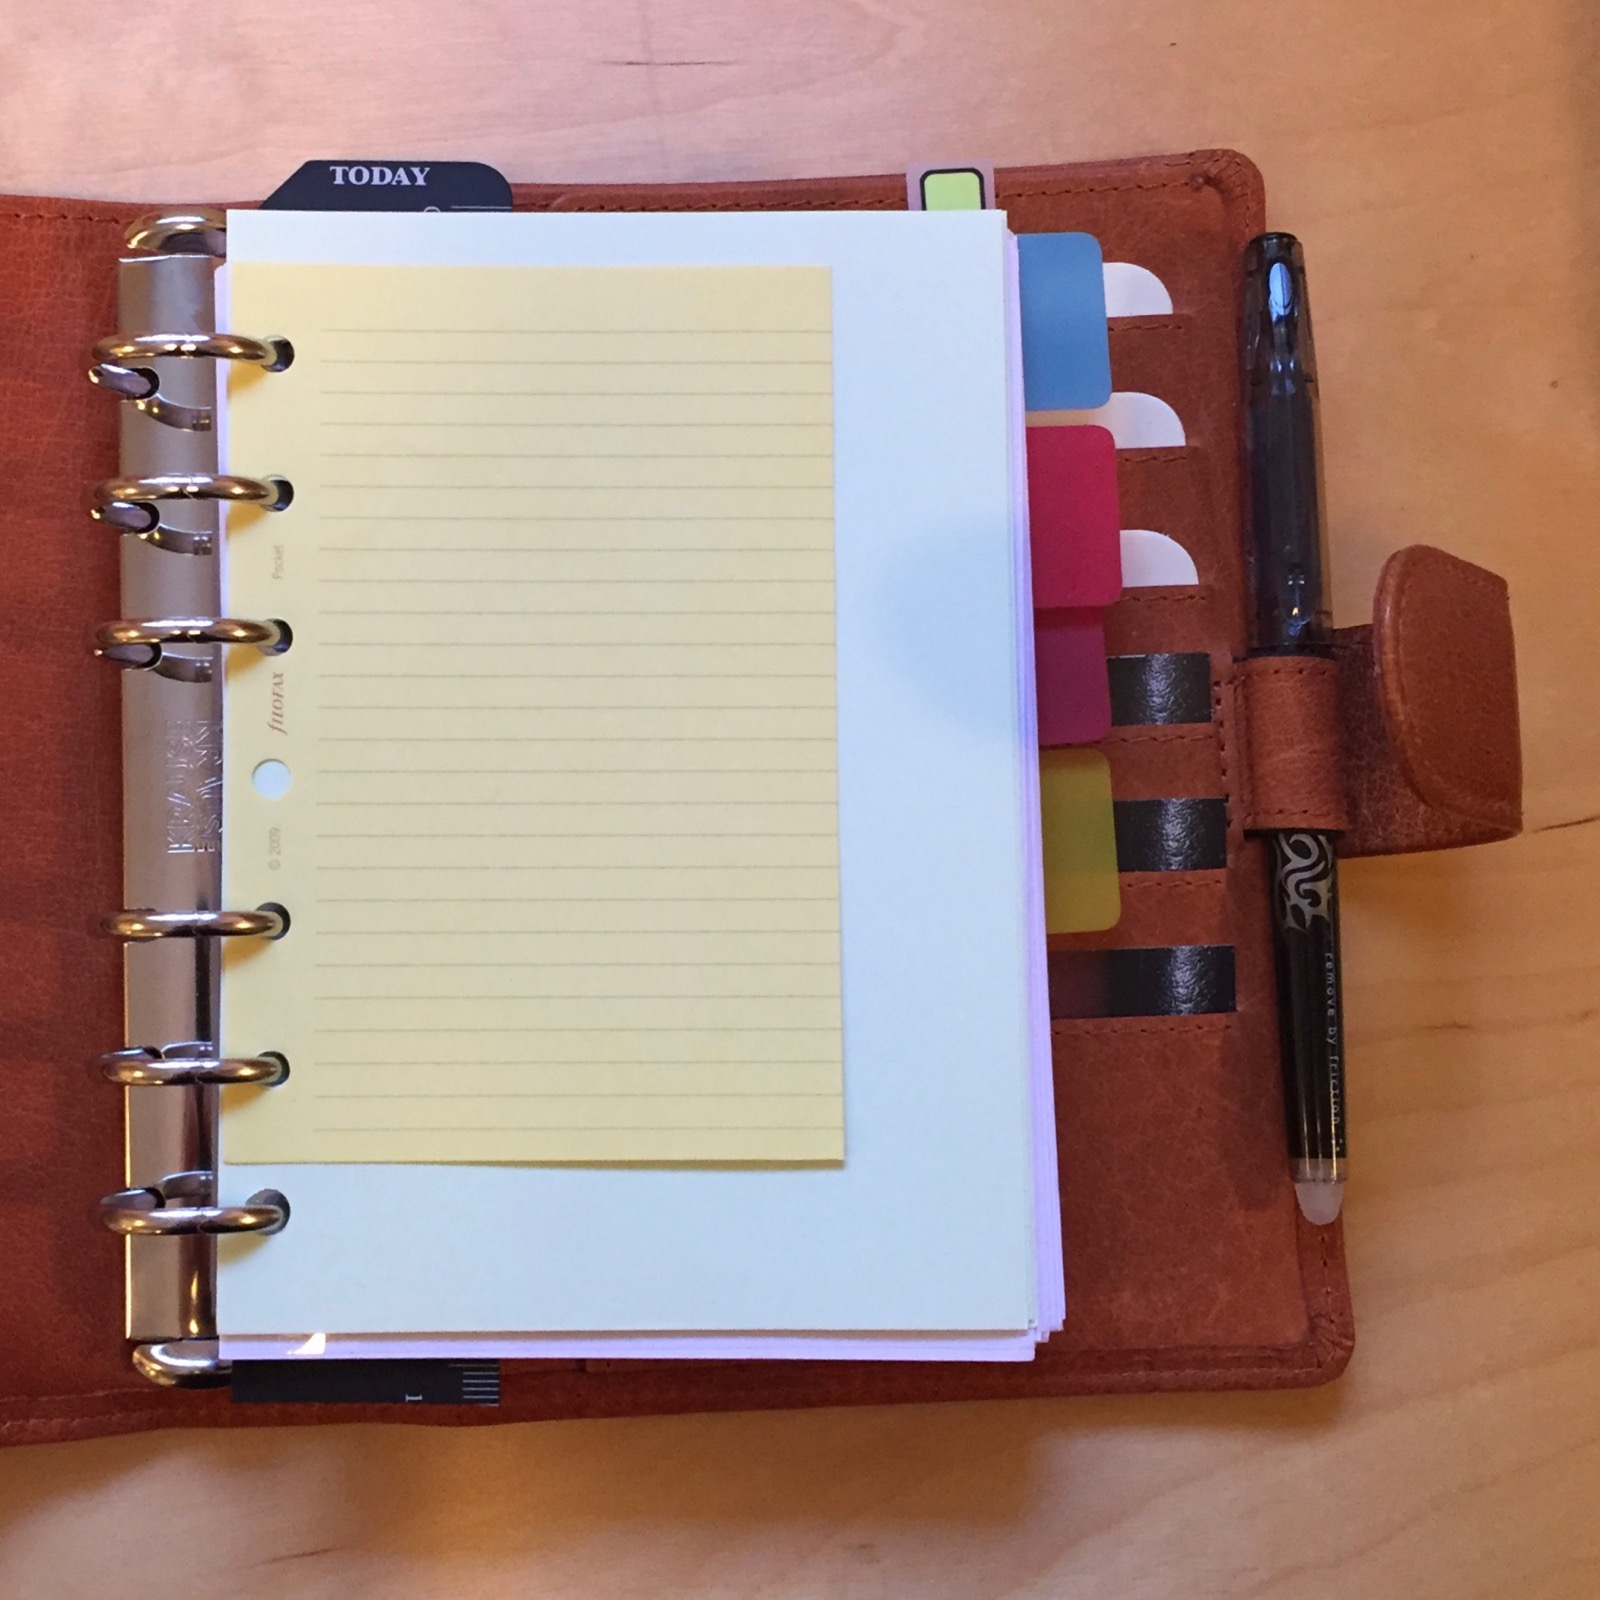 Difference Between A5 And Personal Filofax